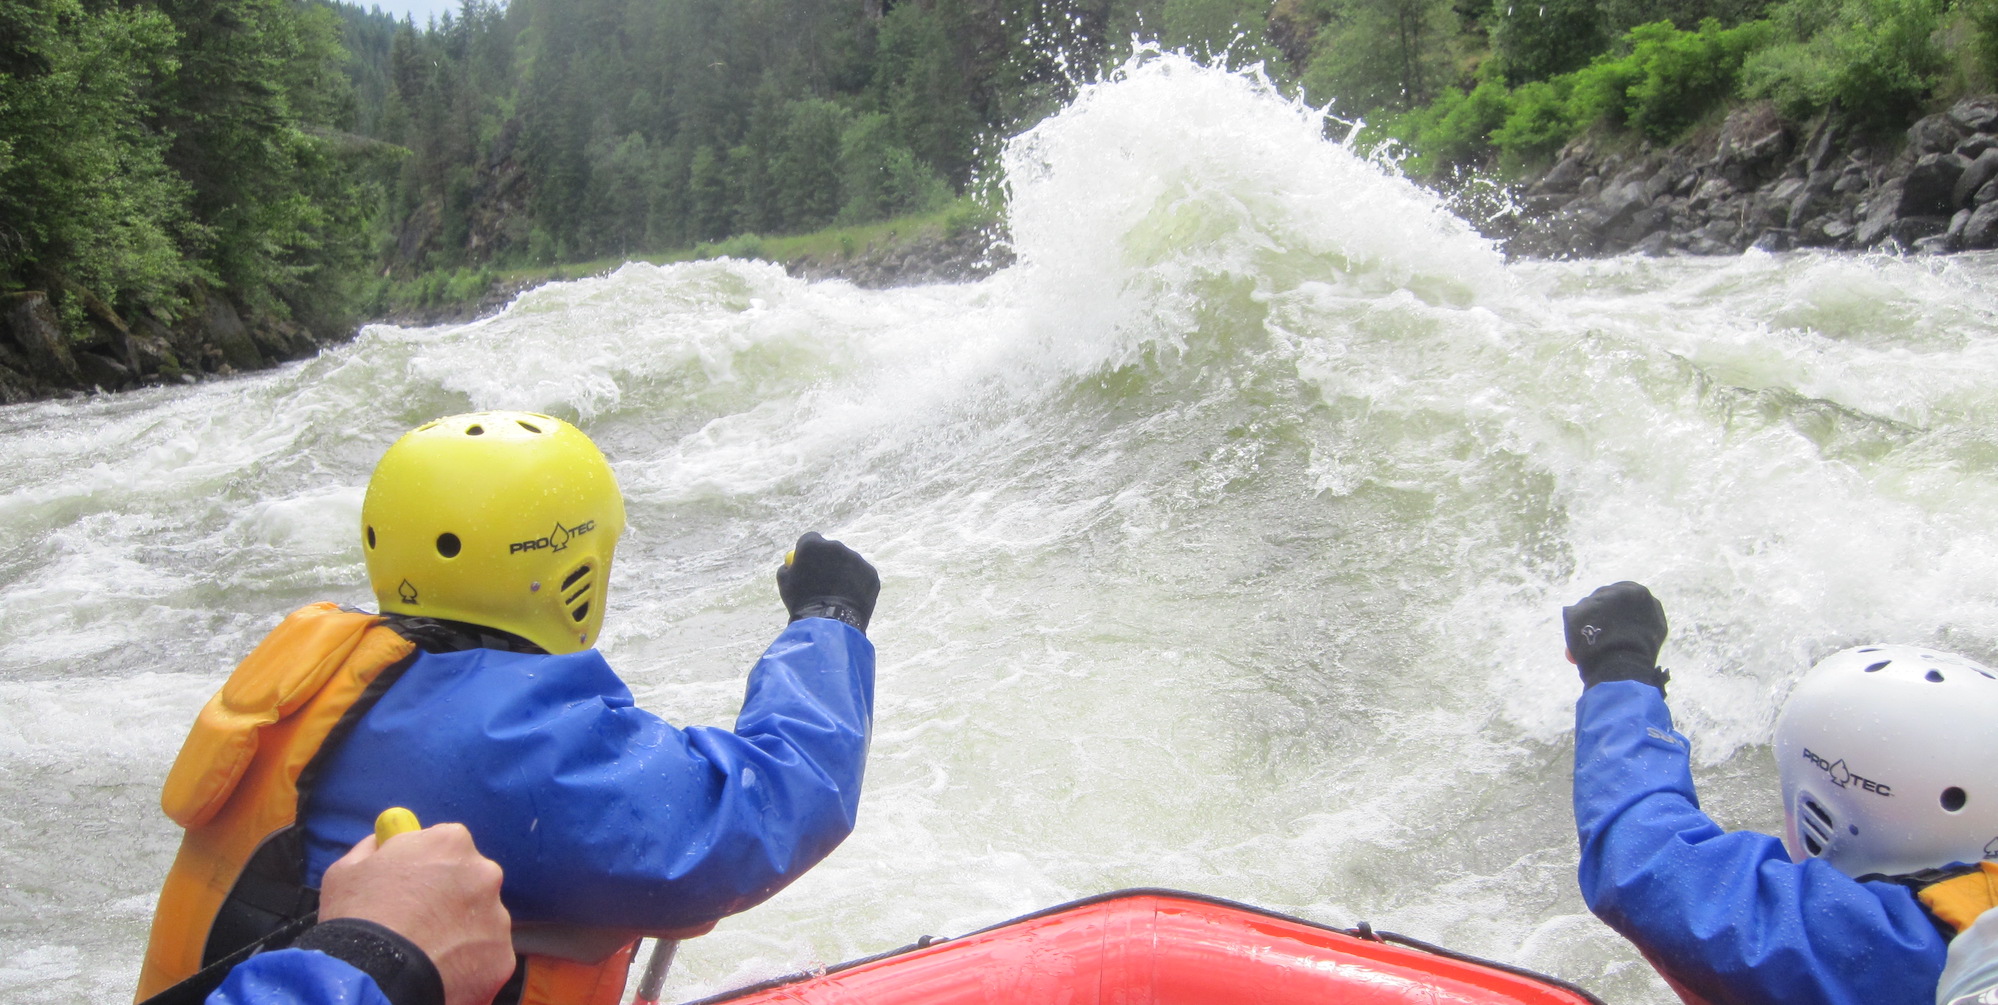 Two paddlers on a red boat looking directly at a huge whitewater wave in front of them on the Lochsa River